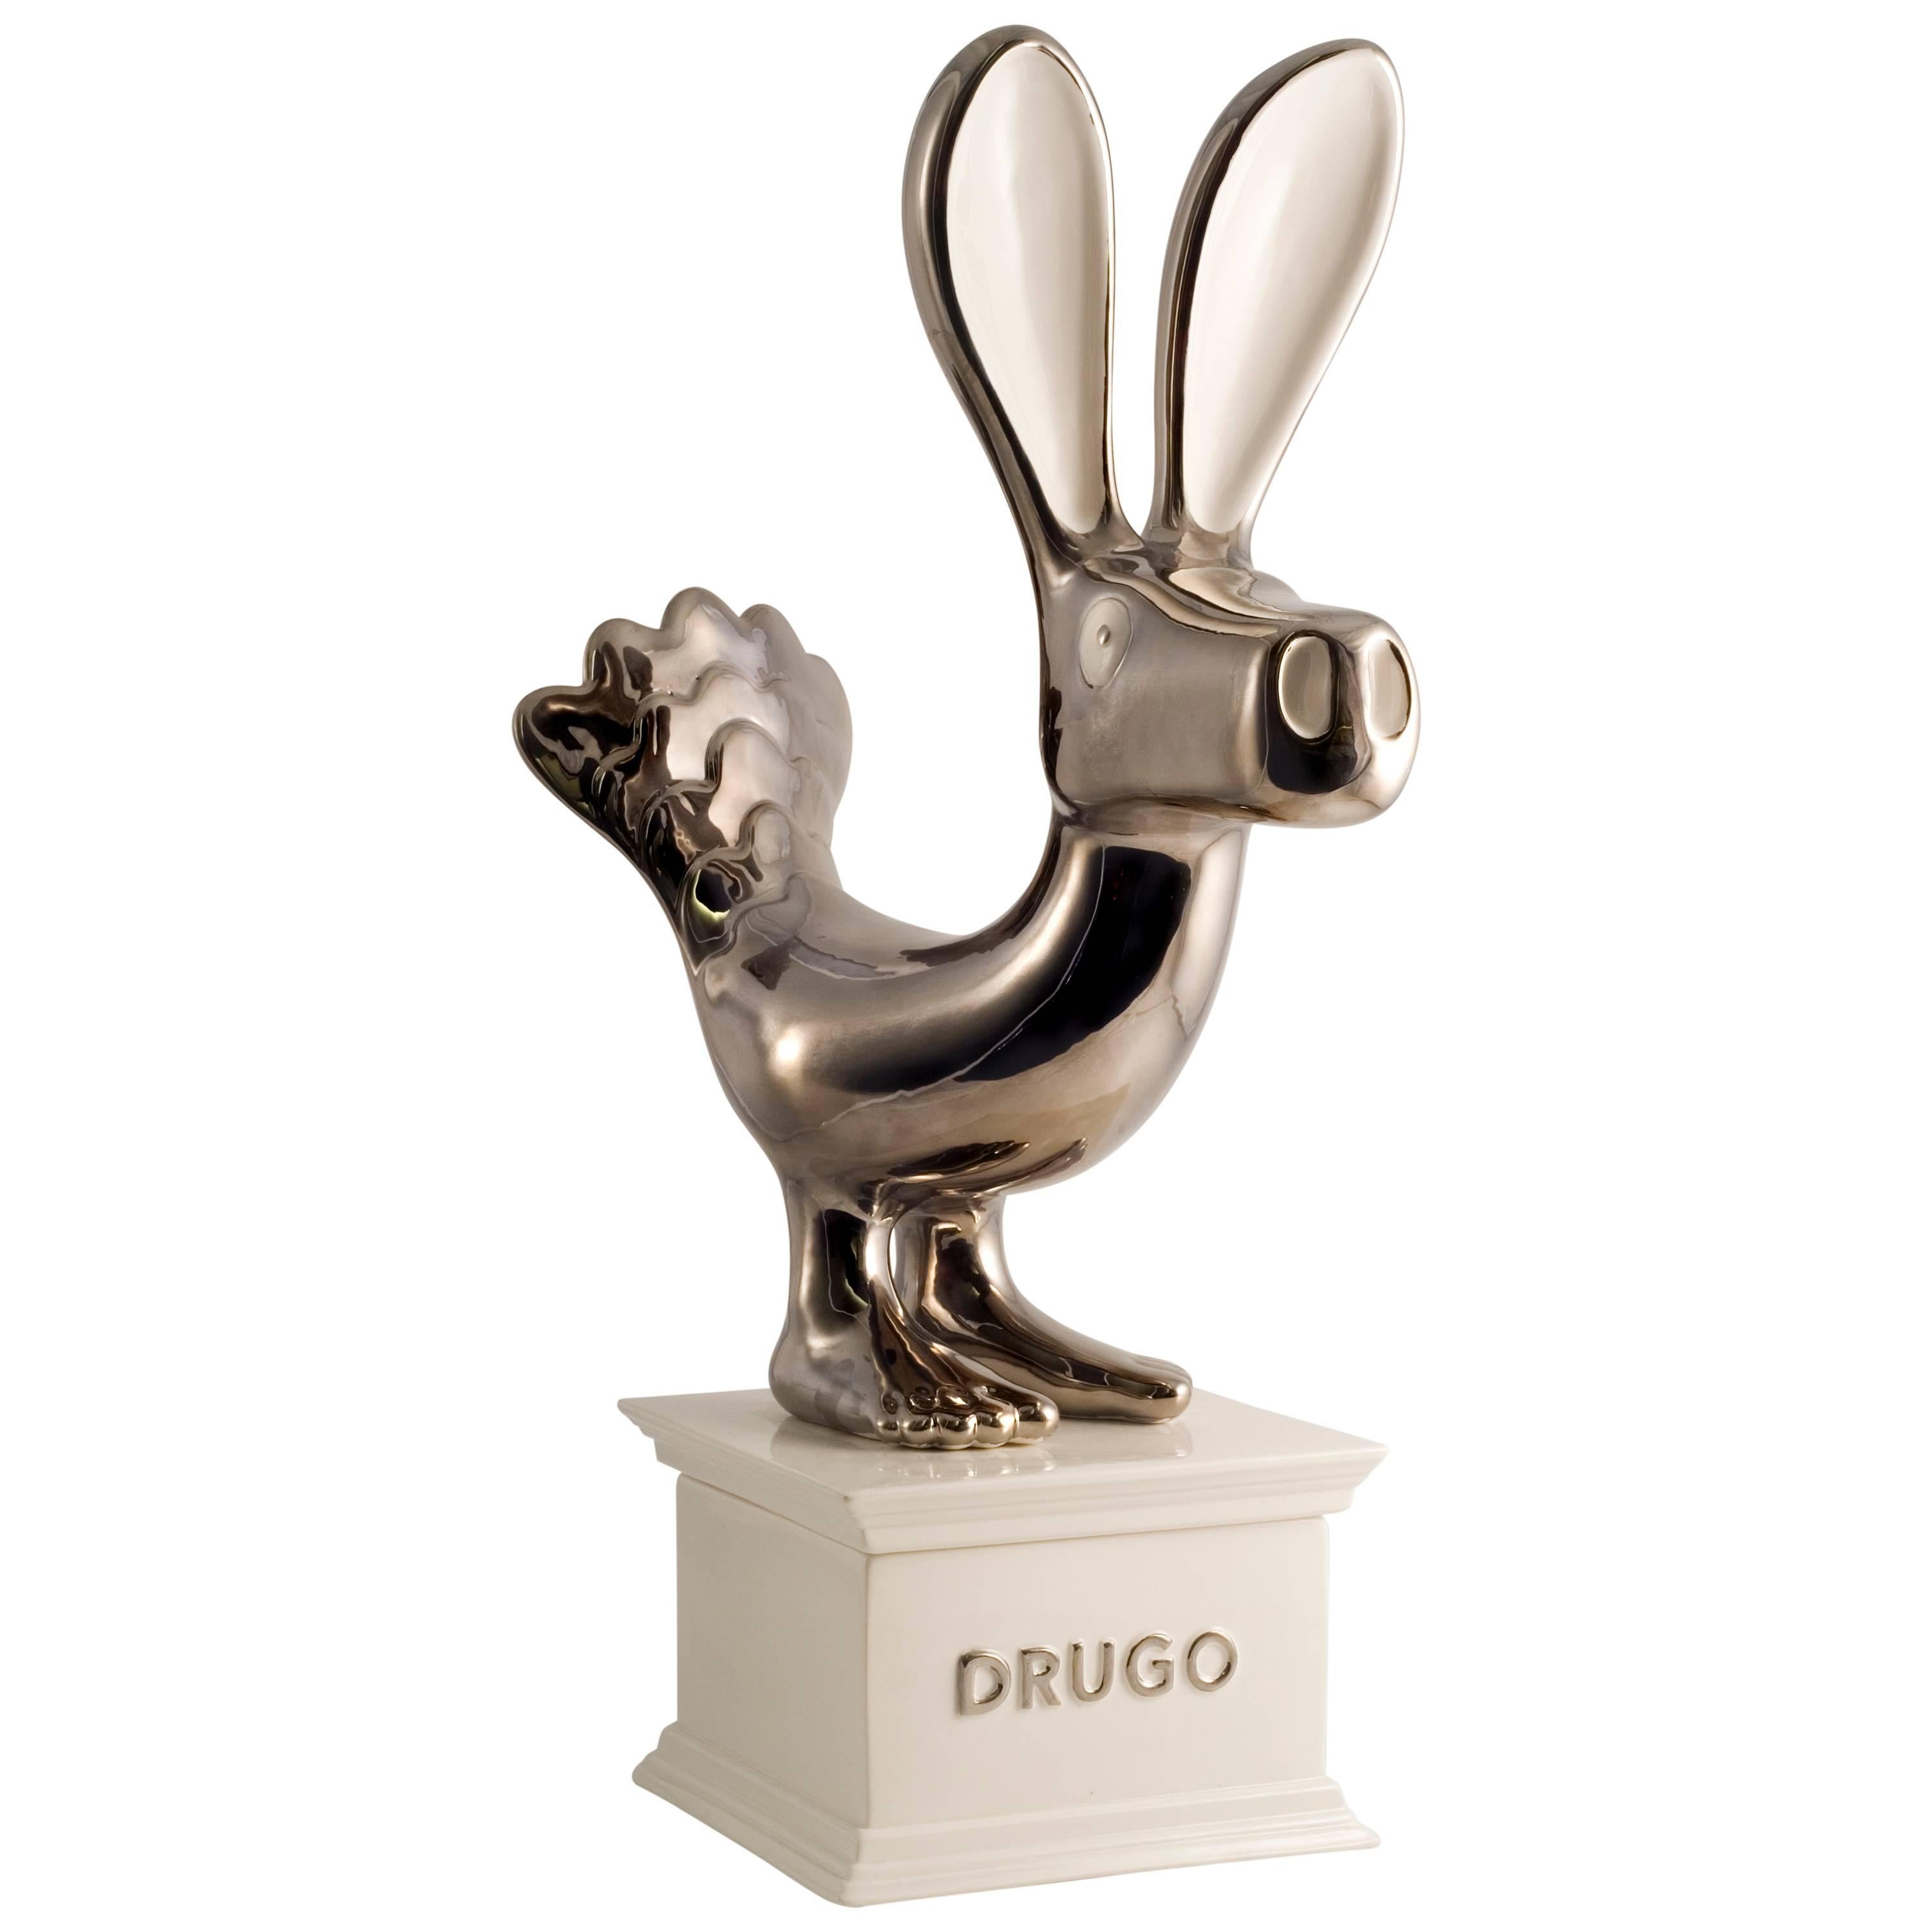 Drugo Ceramic Sculpture by Matteo Cibic for Superego Editions, Italy